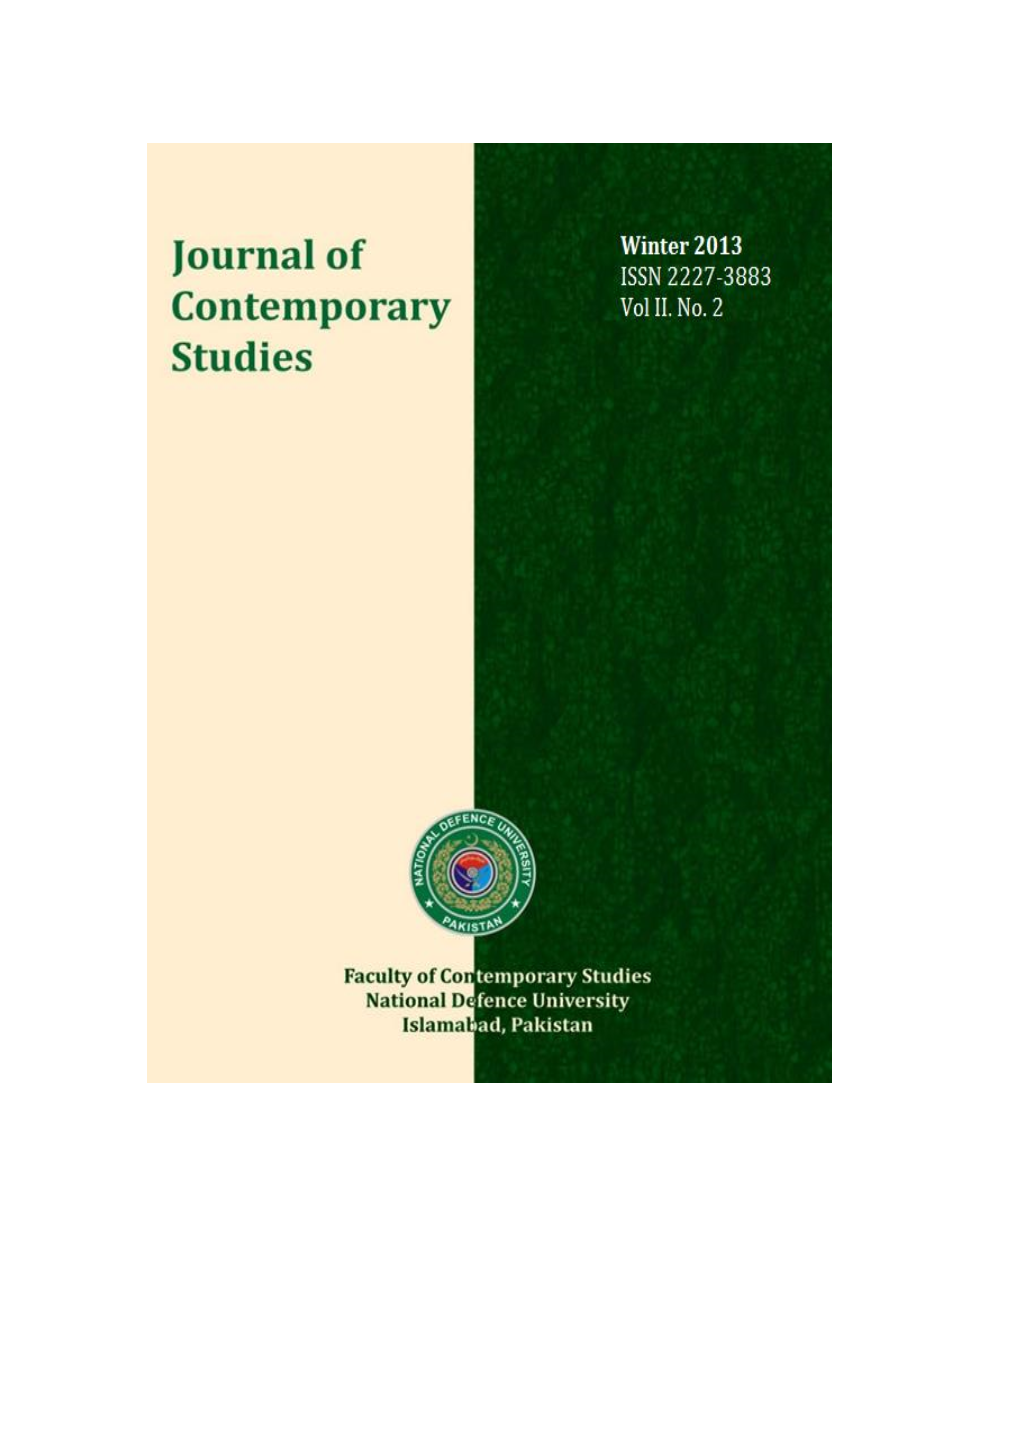 Journal of Contemporary Studies a Publication of Faculty of Contemporary Studies